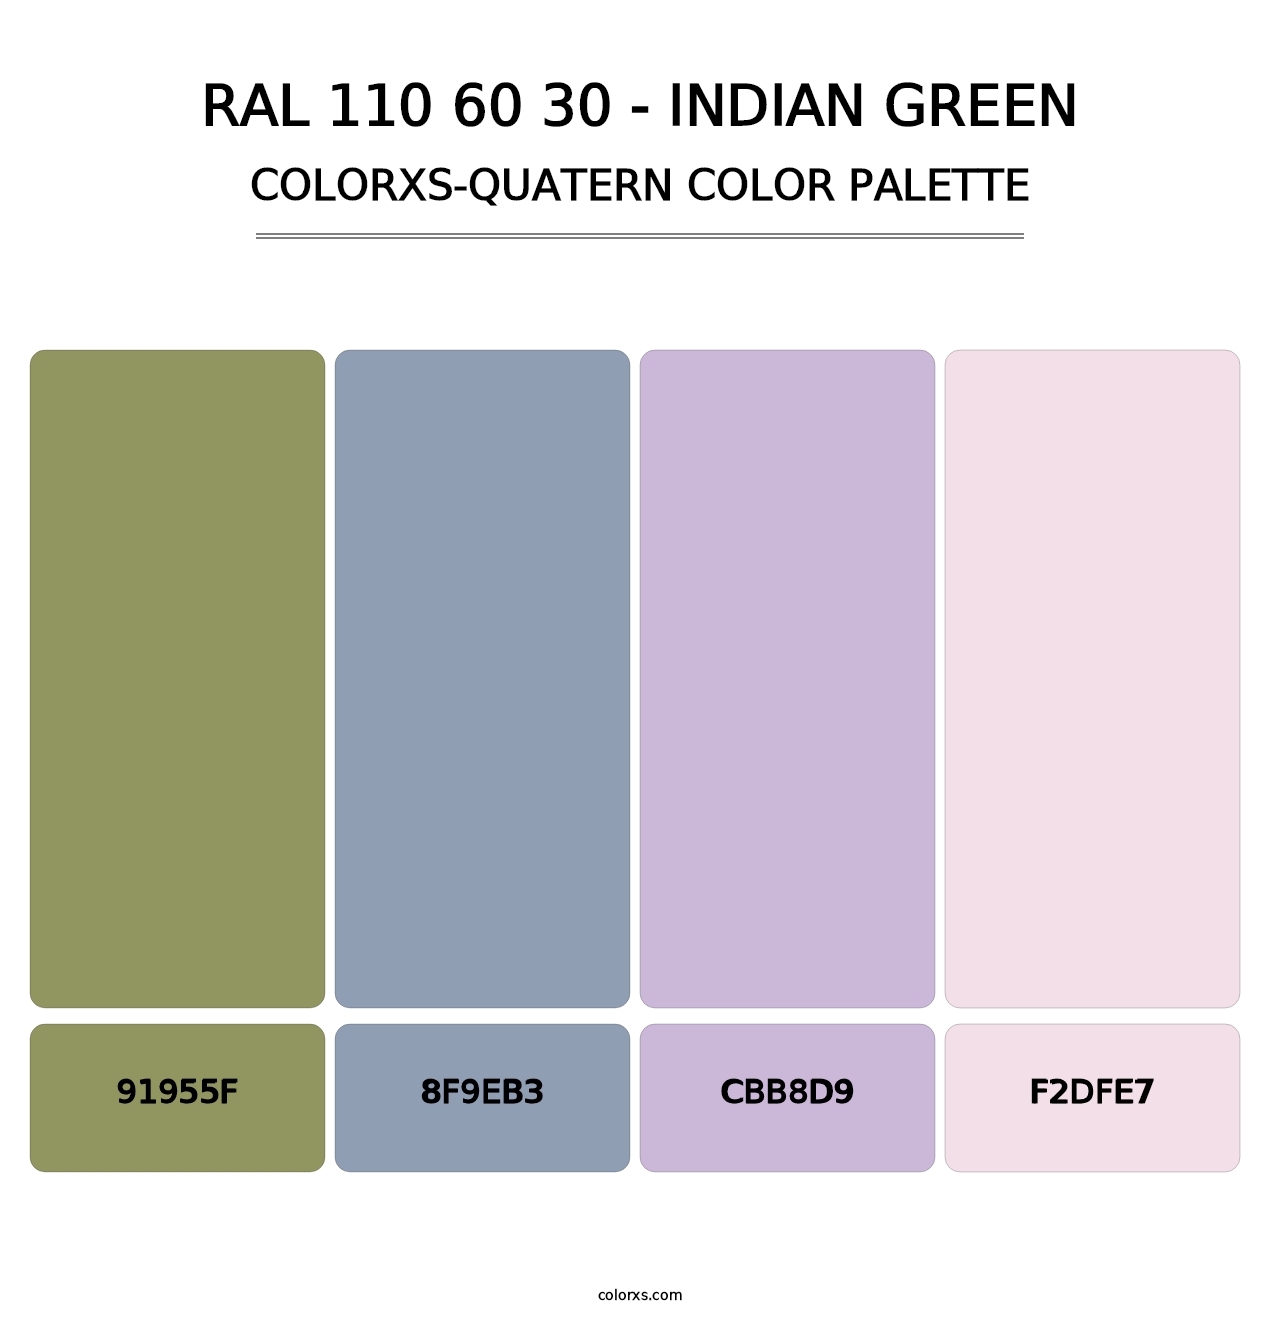 RAL 110 60 30 - Indian Green - Colorxs Quatern Palette